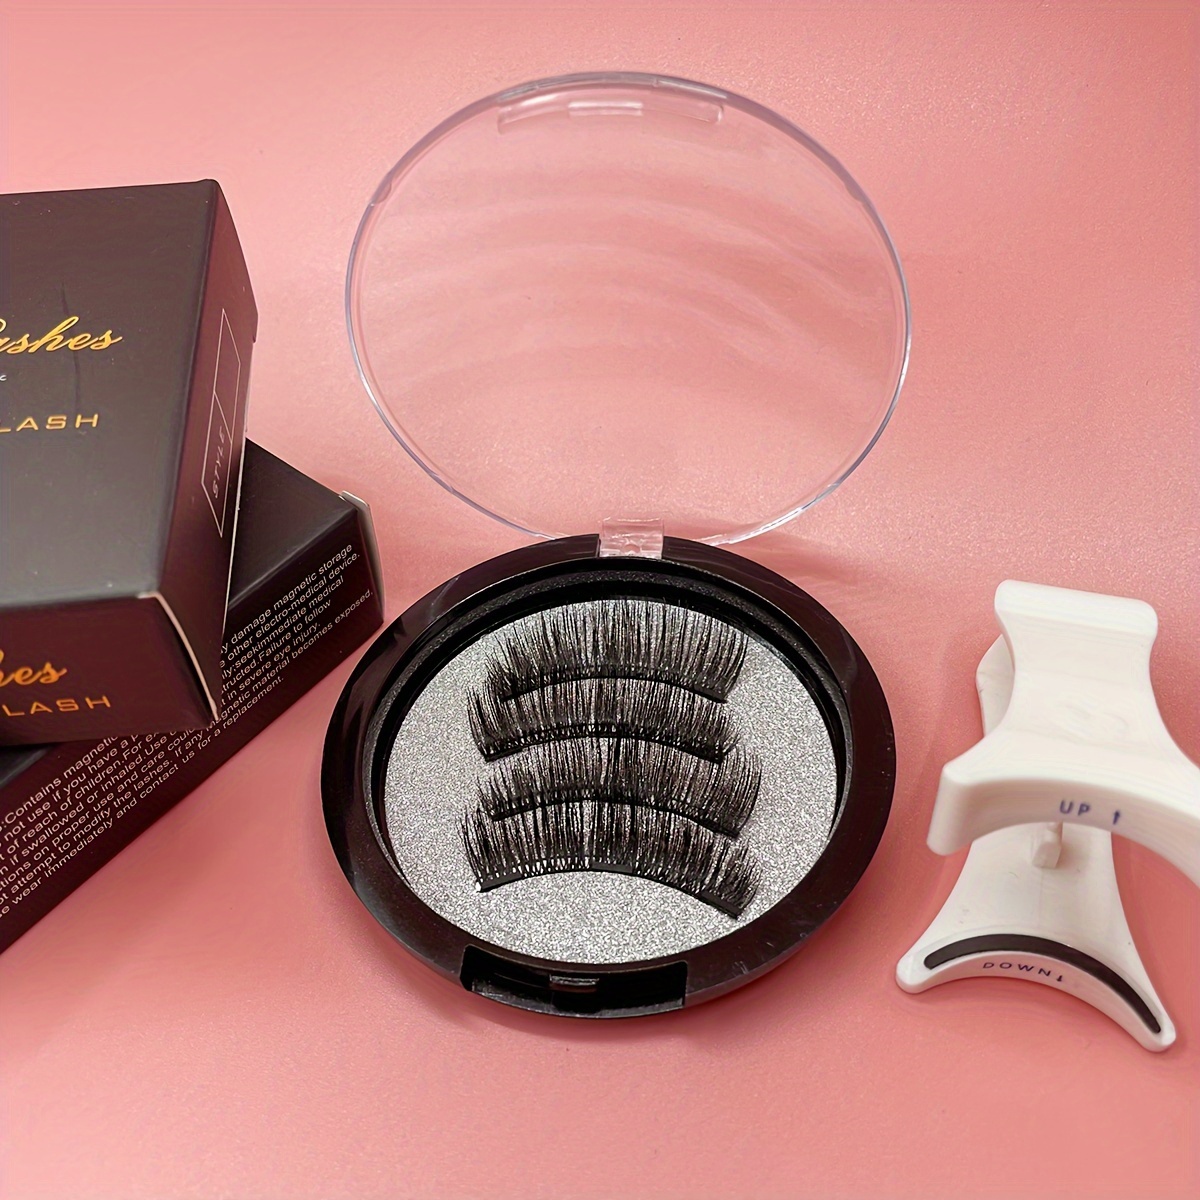 

Magnetic Eyelash Kit With Built-in Black Liner - Reusable, Thick & Natural Look, Includes 3 Magnets For Easy Application - Choose From 1 Or 2 Pairs